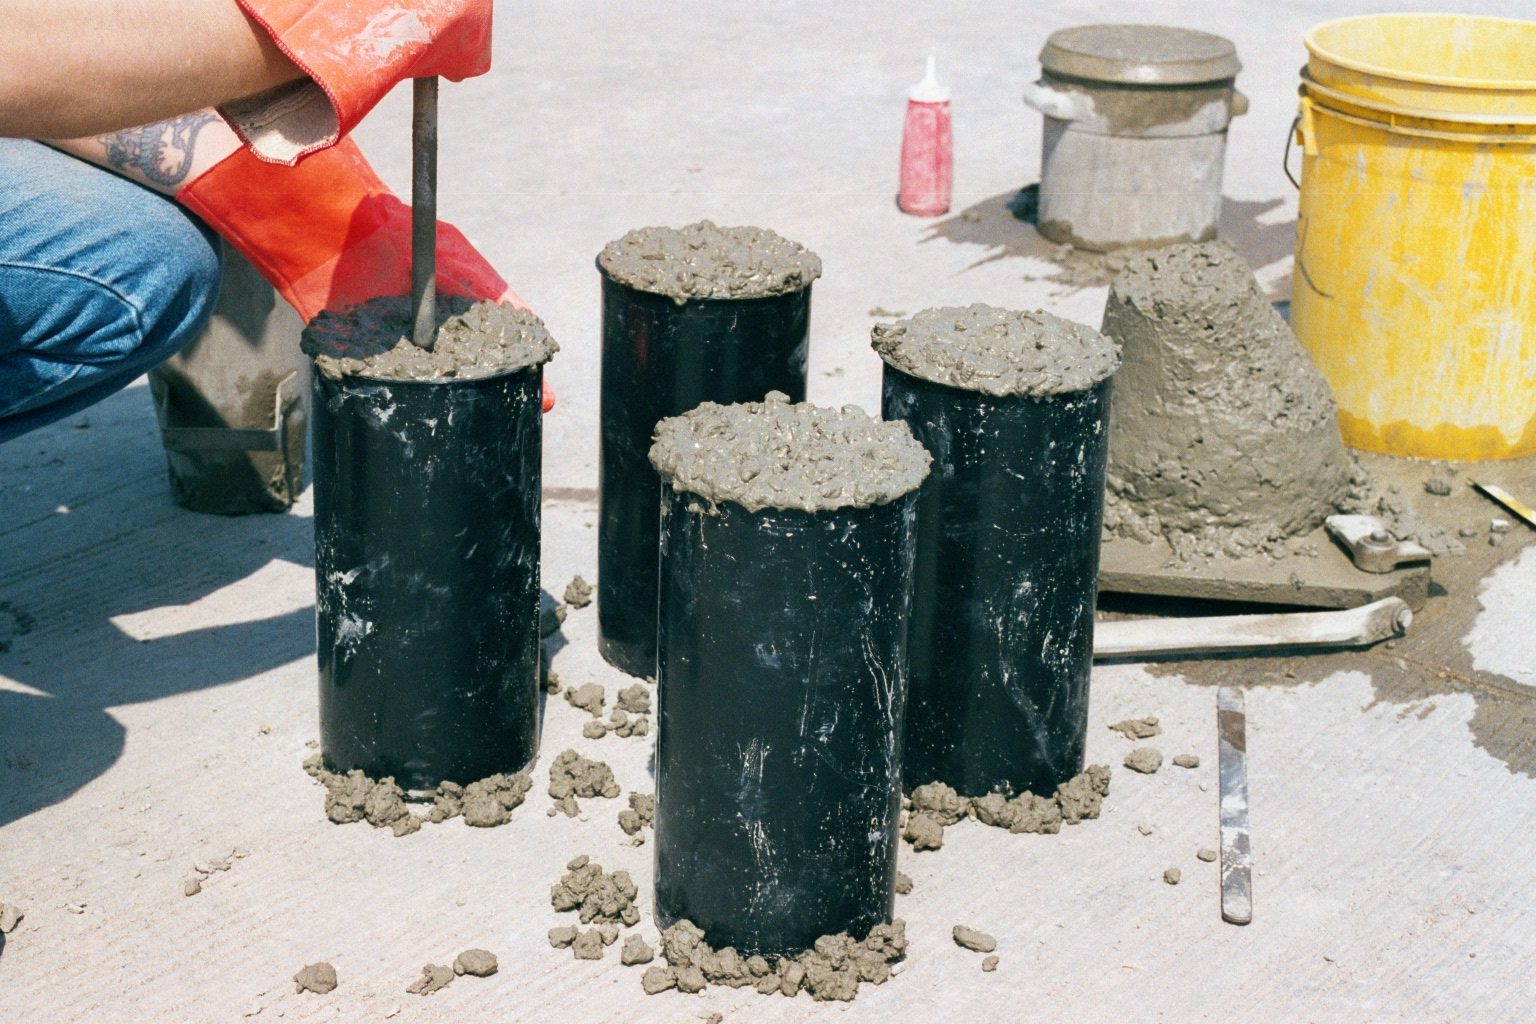 A construction worker is creating concrete samples to test.